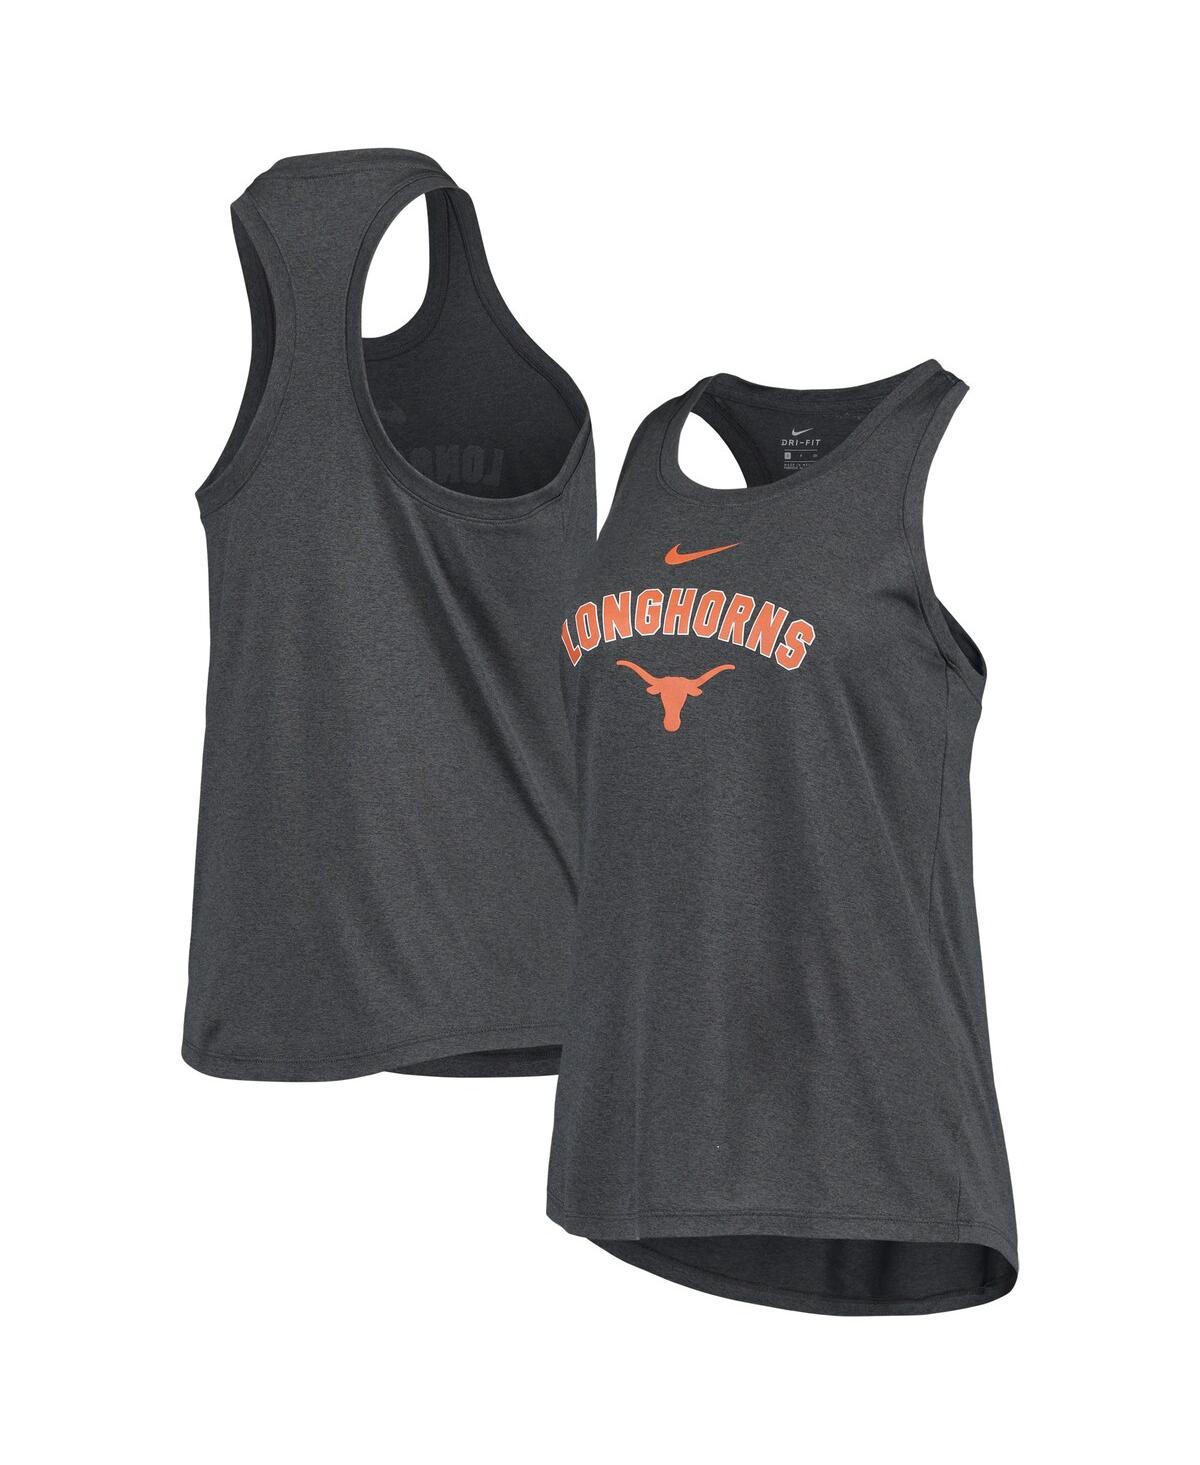 Women's Nike Anthracite Texas Longhorns Arch and Logo Classic Performance Tank Top - Anthracite